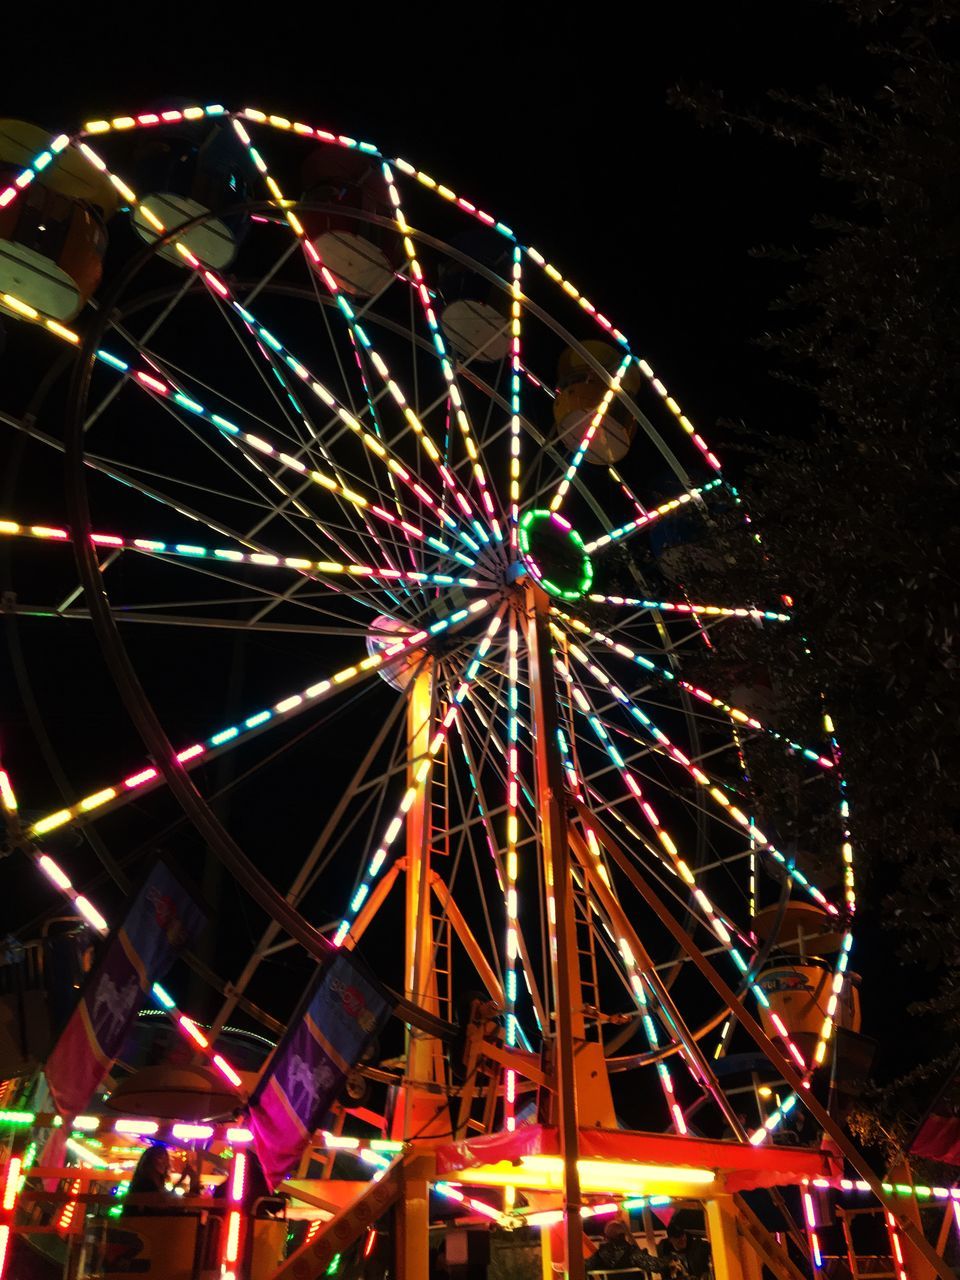 amusement park, amusement park ride, illuminated, arts culture and entertainment, night, ferris wheel, multi colored, low angle view, no people, sky, glowing, outdoors, fairground, spinning, architecture, geometric shape, nature, motion, carnival, enjoyment, nightlife, excitement, stage